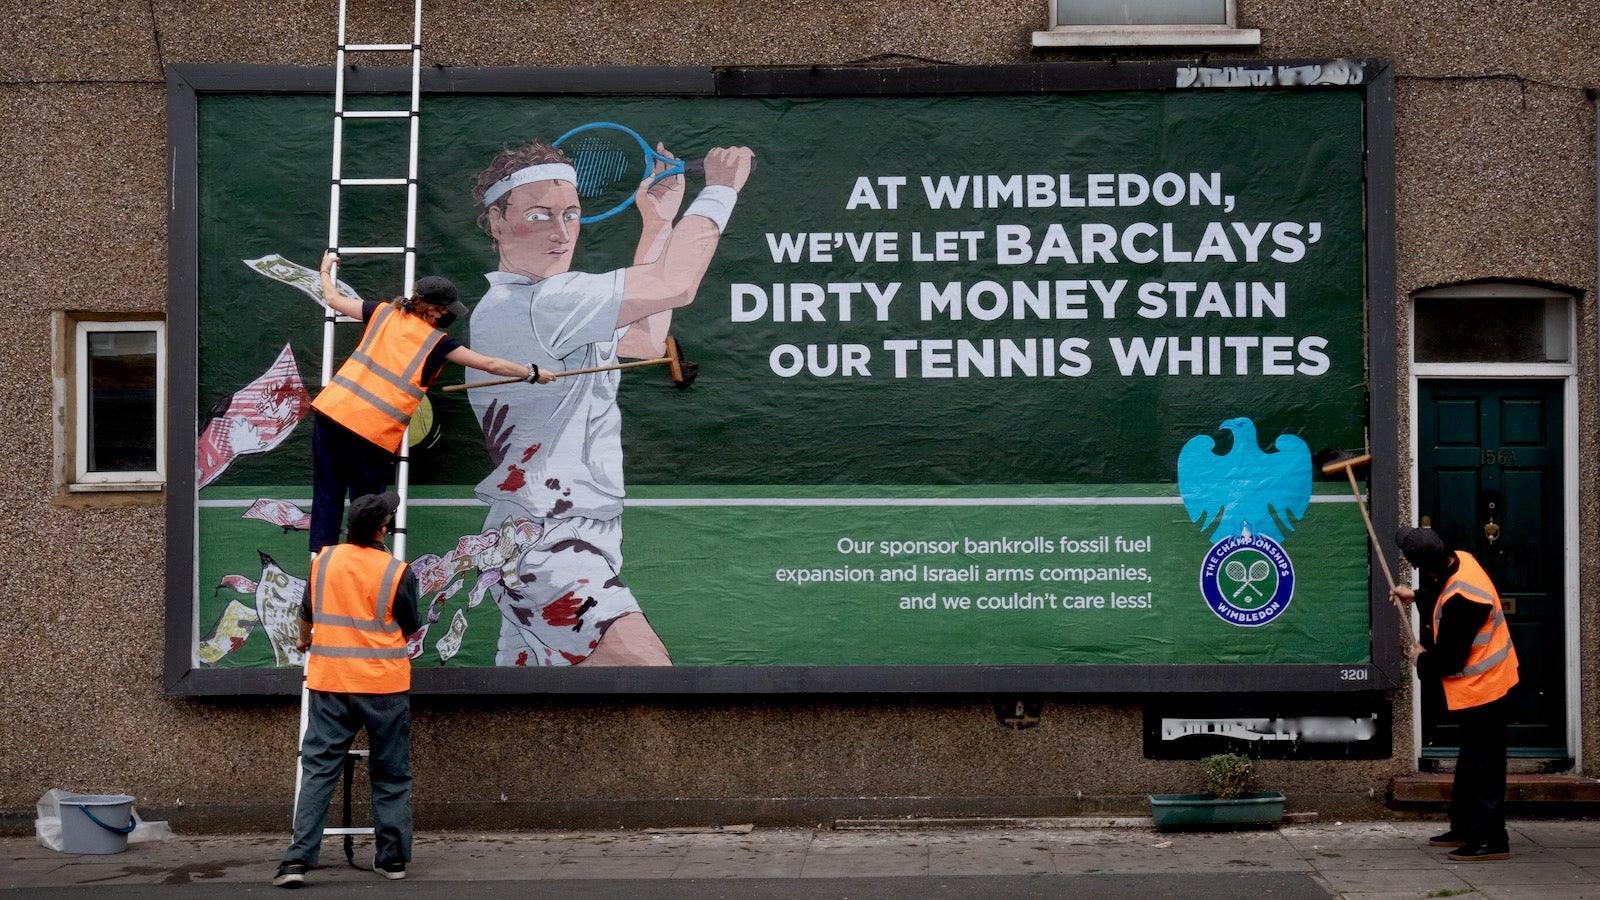 all england lawn tennis club, barclays, wimbledon, artists target wimbledon with graphic mock adverts over barclays sponsorship